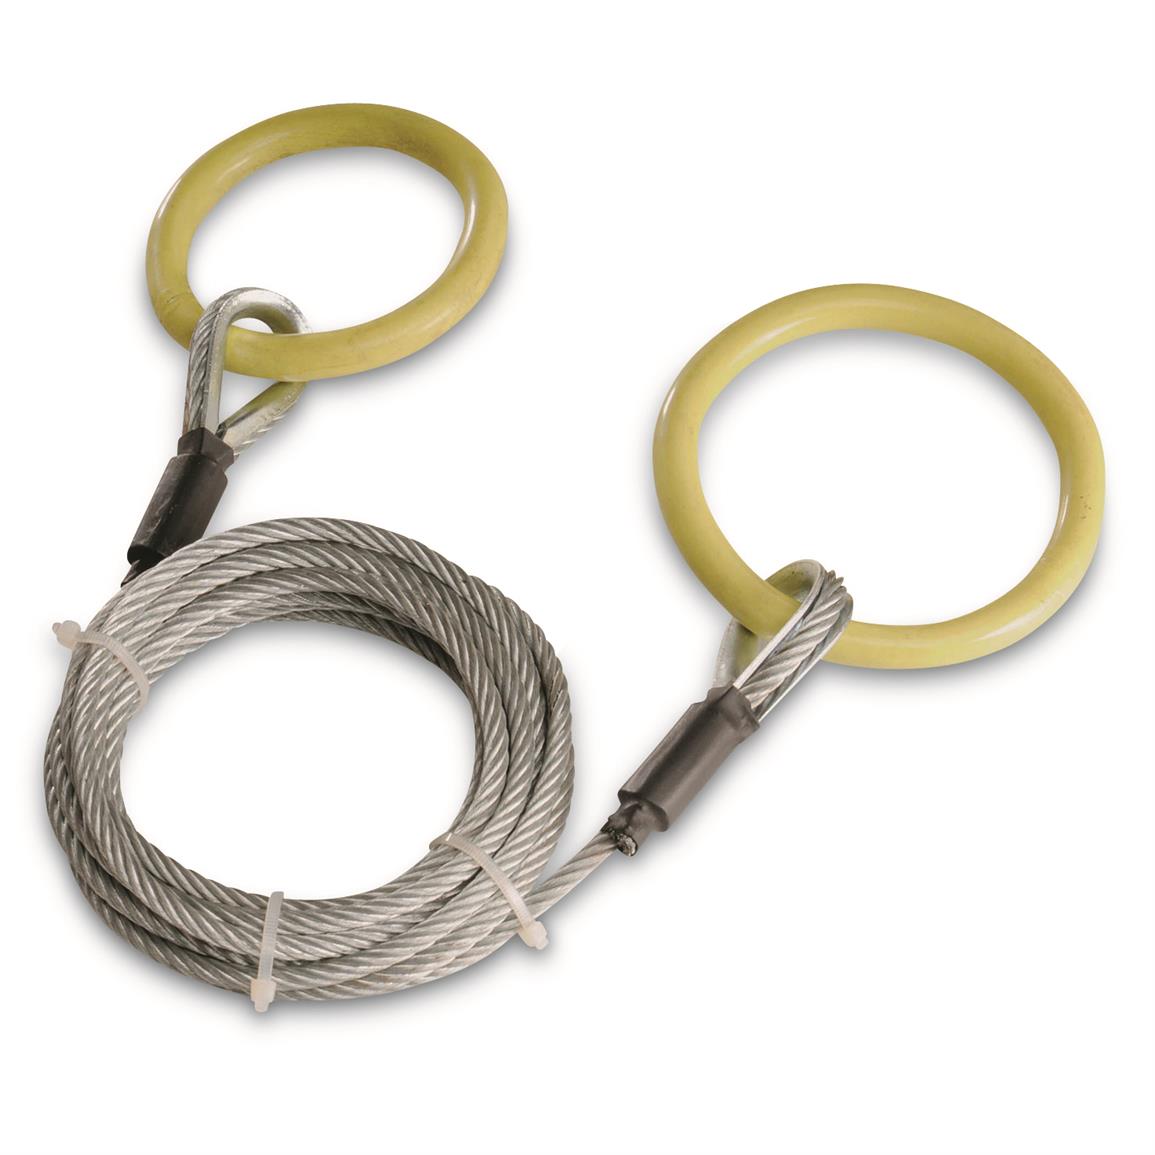 Timber Tuff Log Choker Cable with 2 Tow Rings